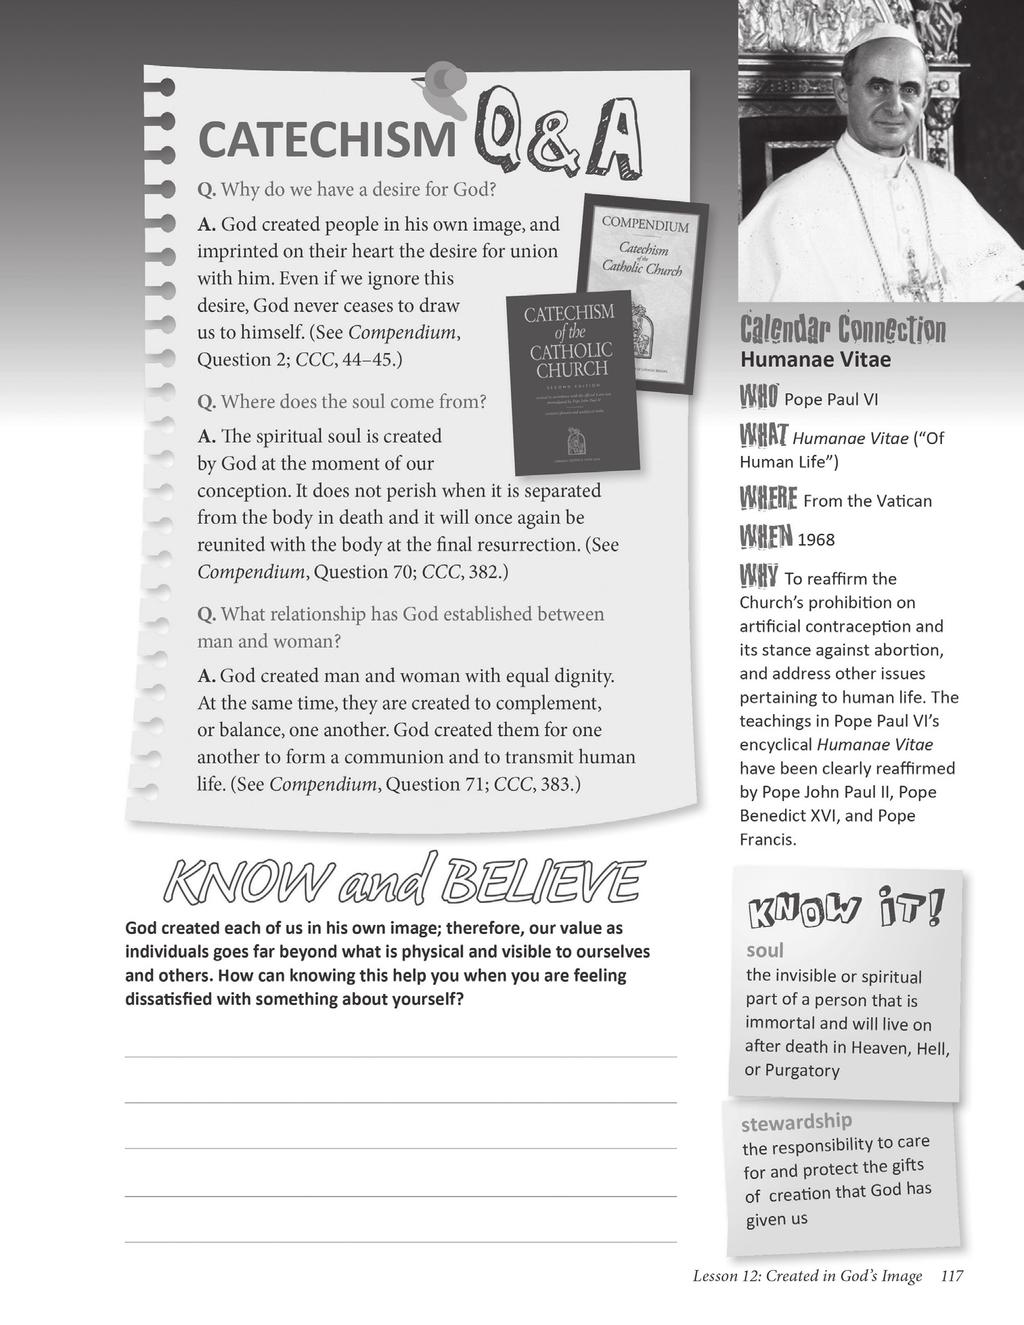 Catechism Q&A Direct the young people to silently read the Catechism Q&A.